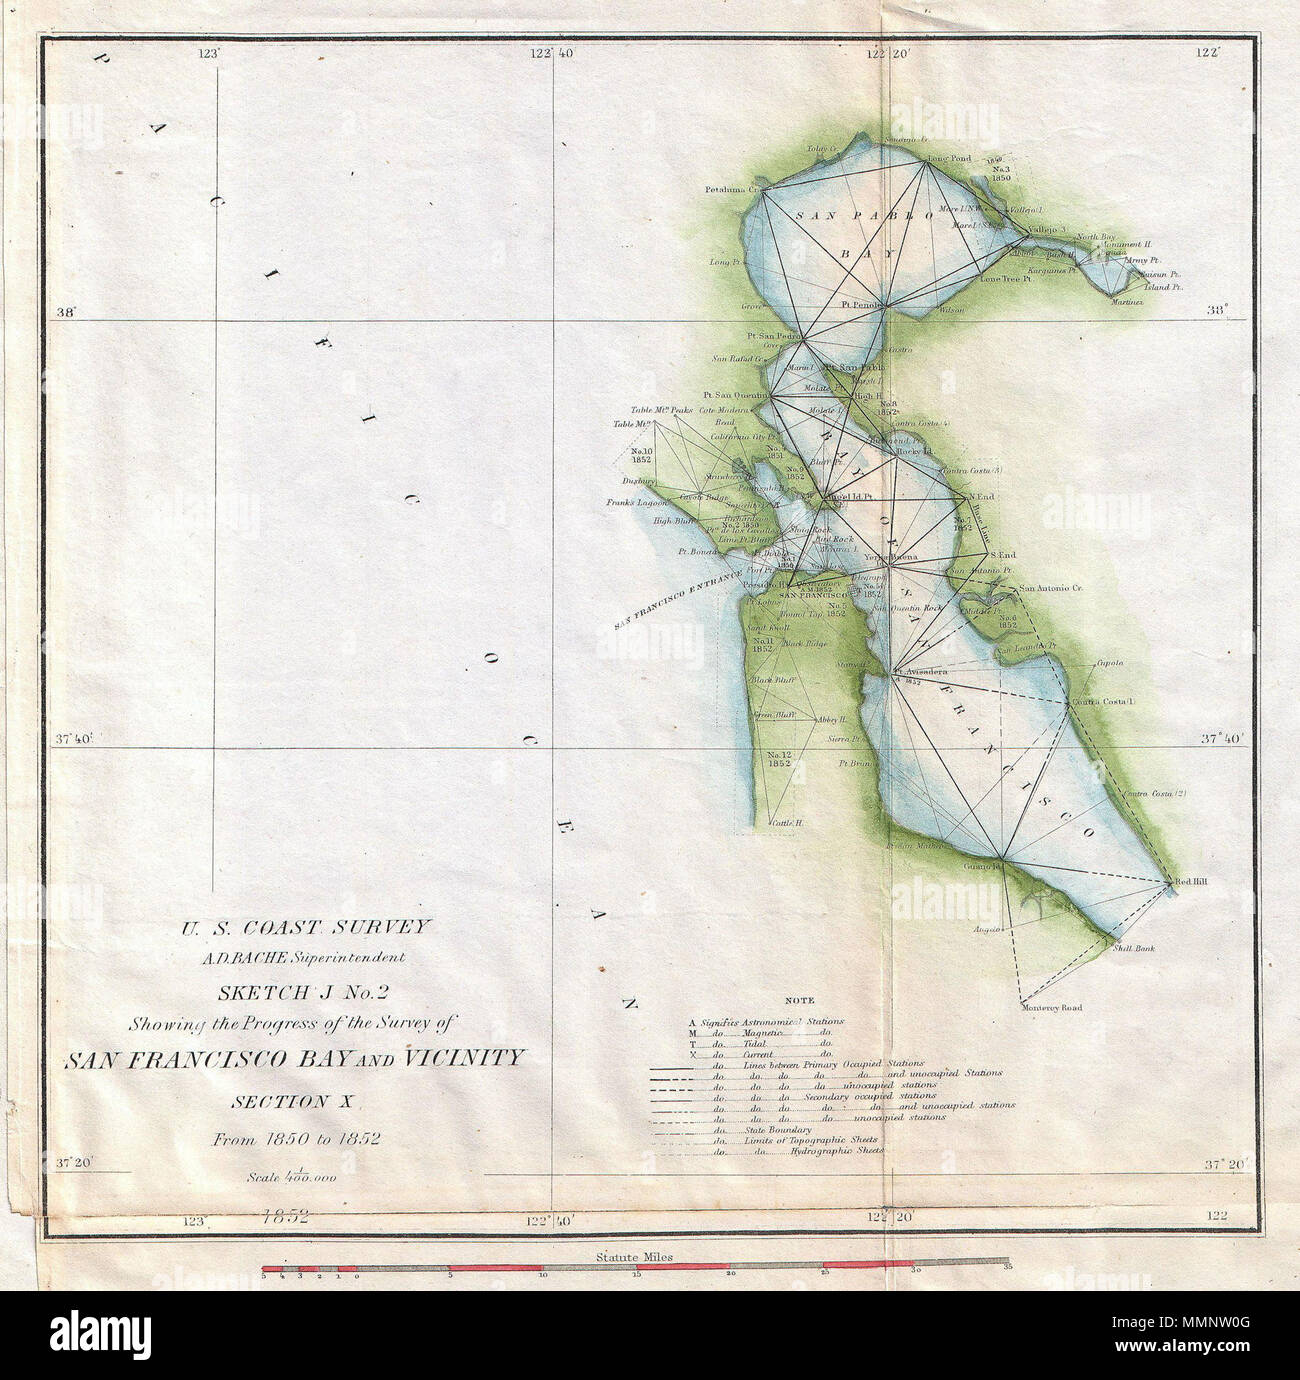 .  English: An attractive hand colored 1853 U.S. Coast Survey triangulation chart or map of San Francisco Bay, California. Shows the progress of the survey work in this area by date annotated sections. Shows points such as California City, San Quentin, San Francisco, Presidio Hill and Lime Point Bluff, among others. Details the grid layout of San Francisco city. The hand color work on this beautiful map is exceptionally well done. This map was compiled under the direction of A. D. Bache, Superintendent of the Survey of the Coast of the United States and one of the most influential American car Stock Photo